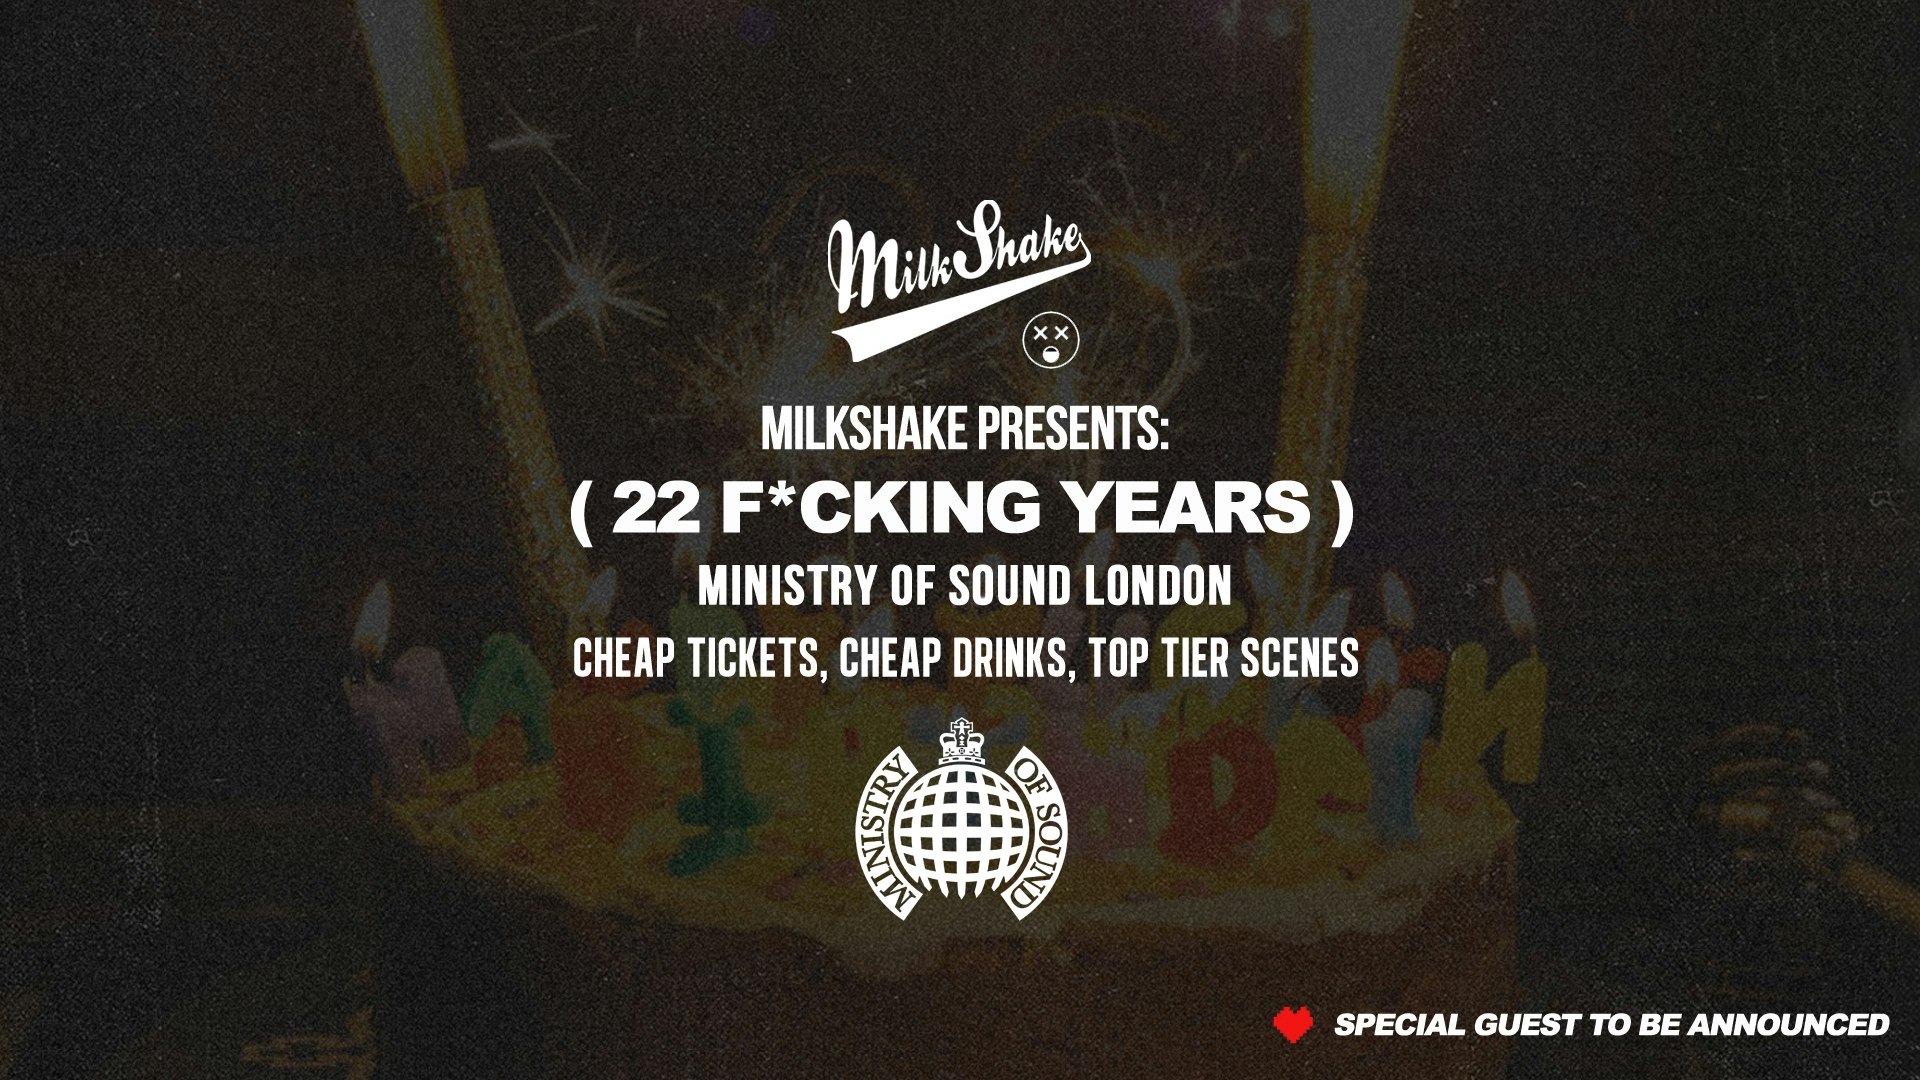 Ministry of Sound, Milkshake 22 F*CKING YEARS – 🎂 Official 22nd Birthday Event 🎈